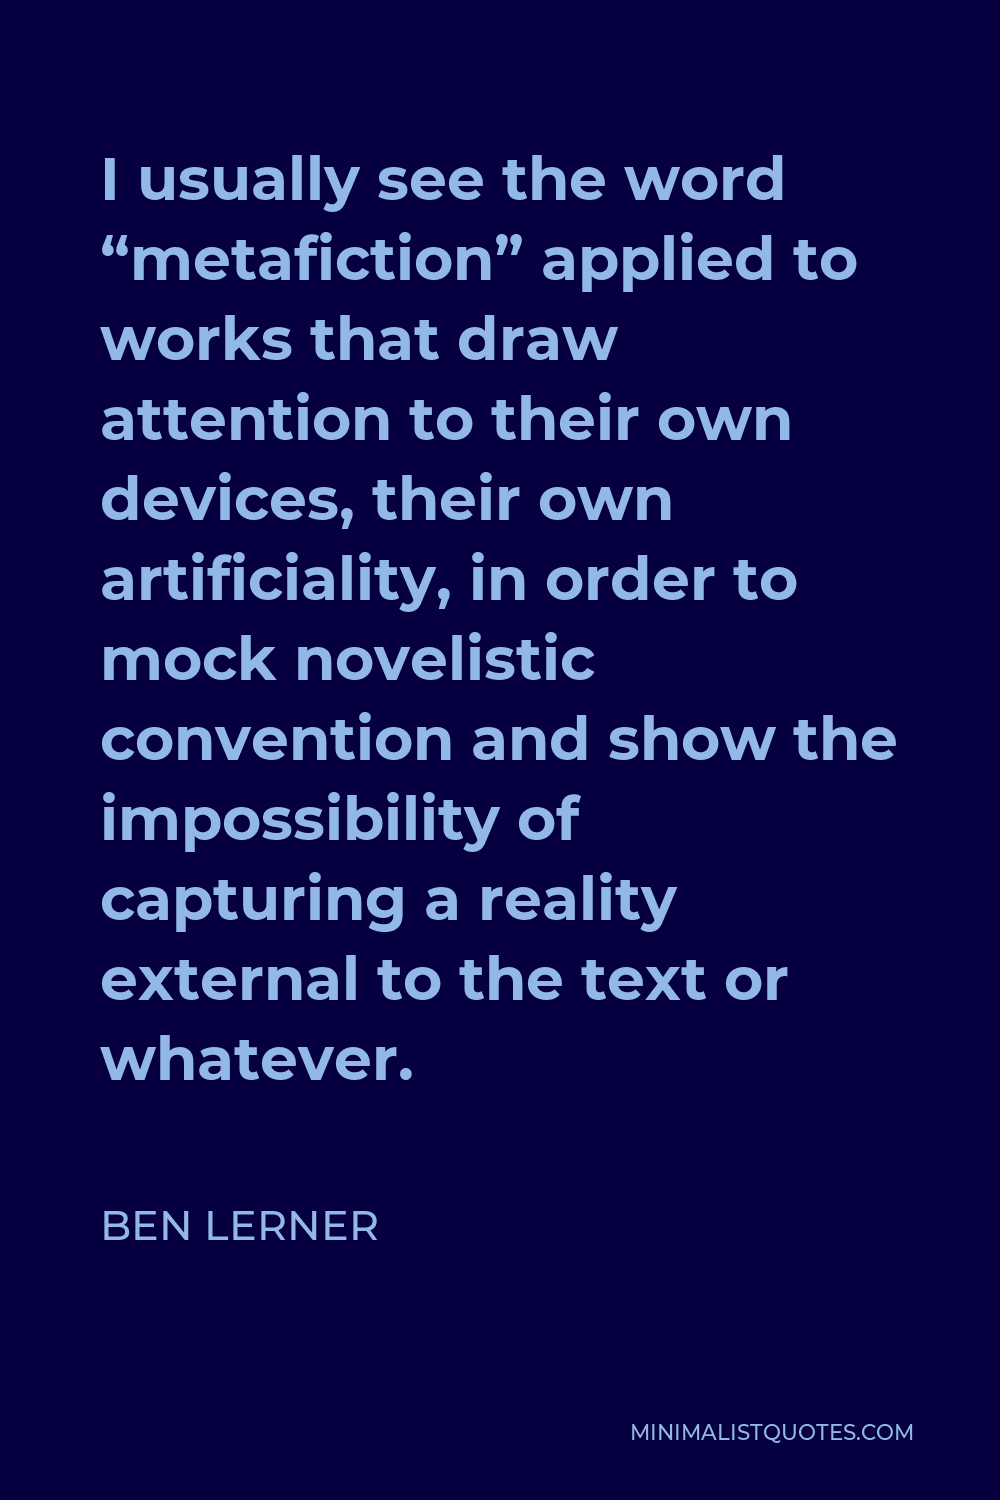 Ben Lerner Quote - I usually see the word “metafiction” applied to works that draw attention to their own devices, their own artificiality, in order to mock novelistic convention and show the impossibility of capturing a reality external to the text or whatever.